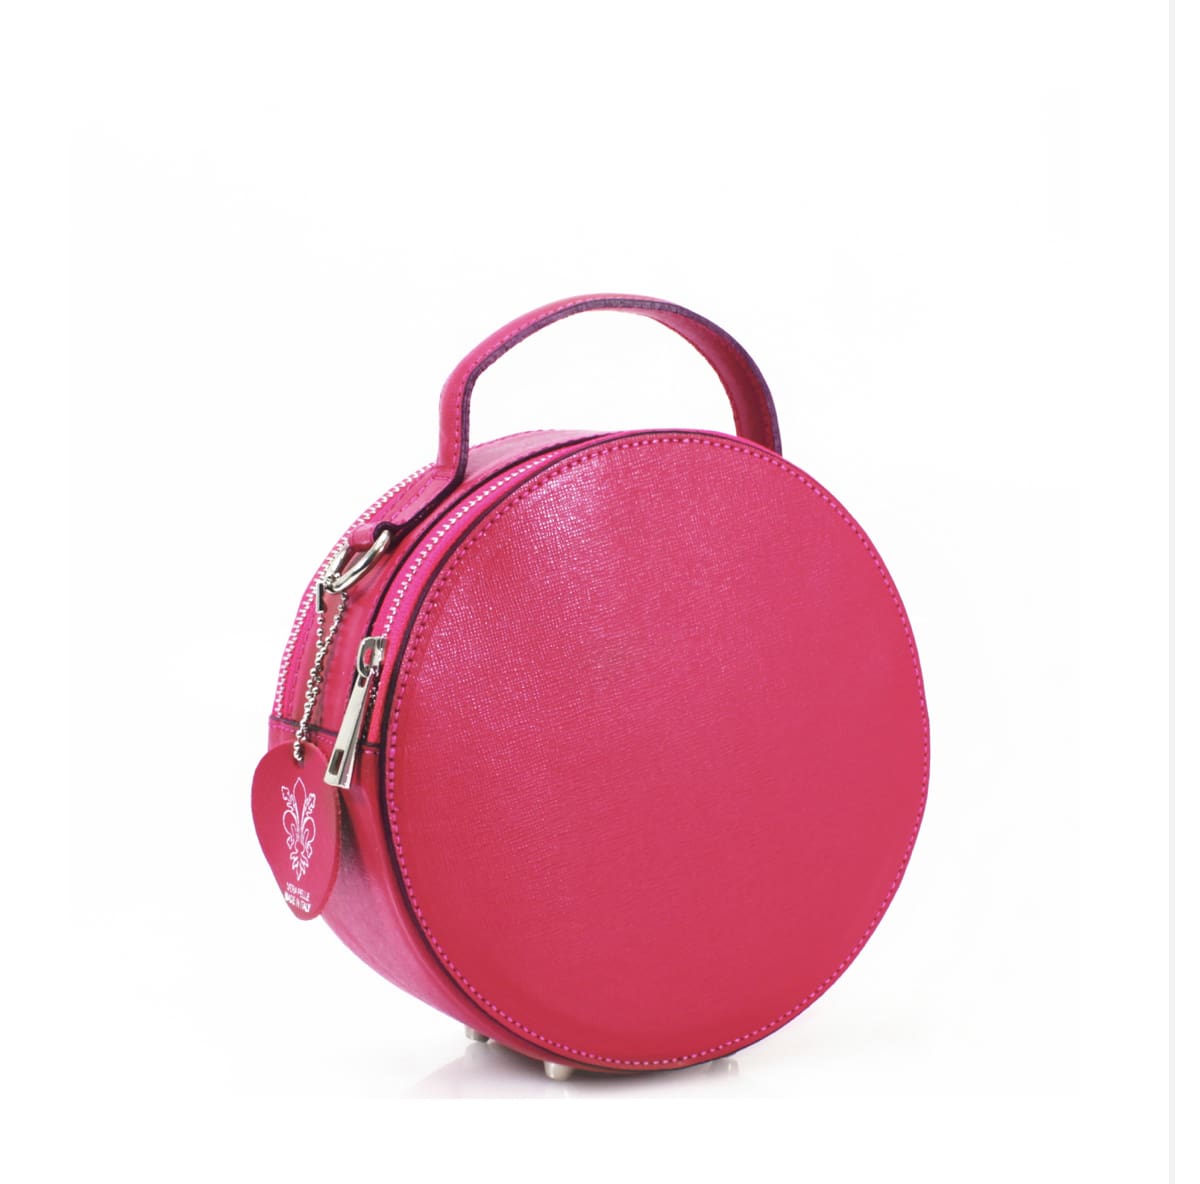 A round pink leather bag with a metal handle.